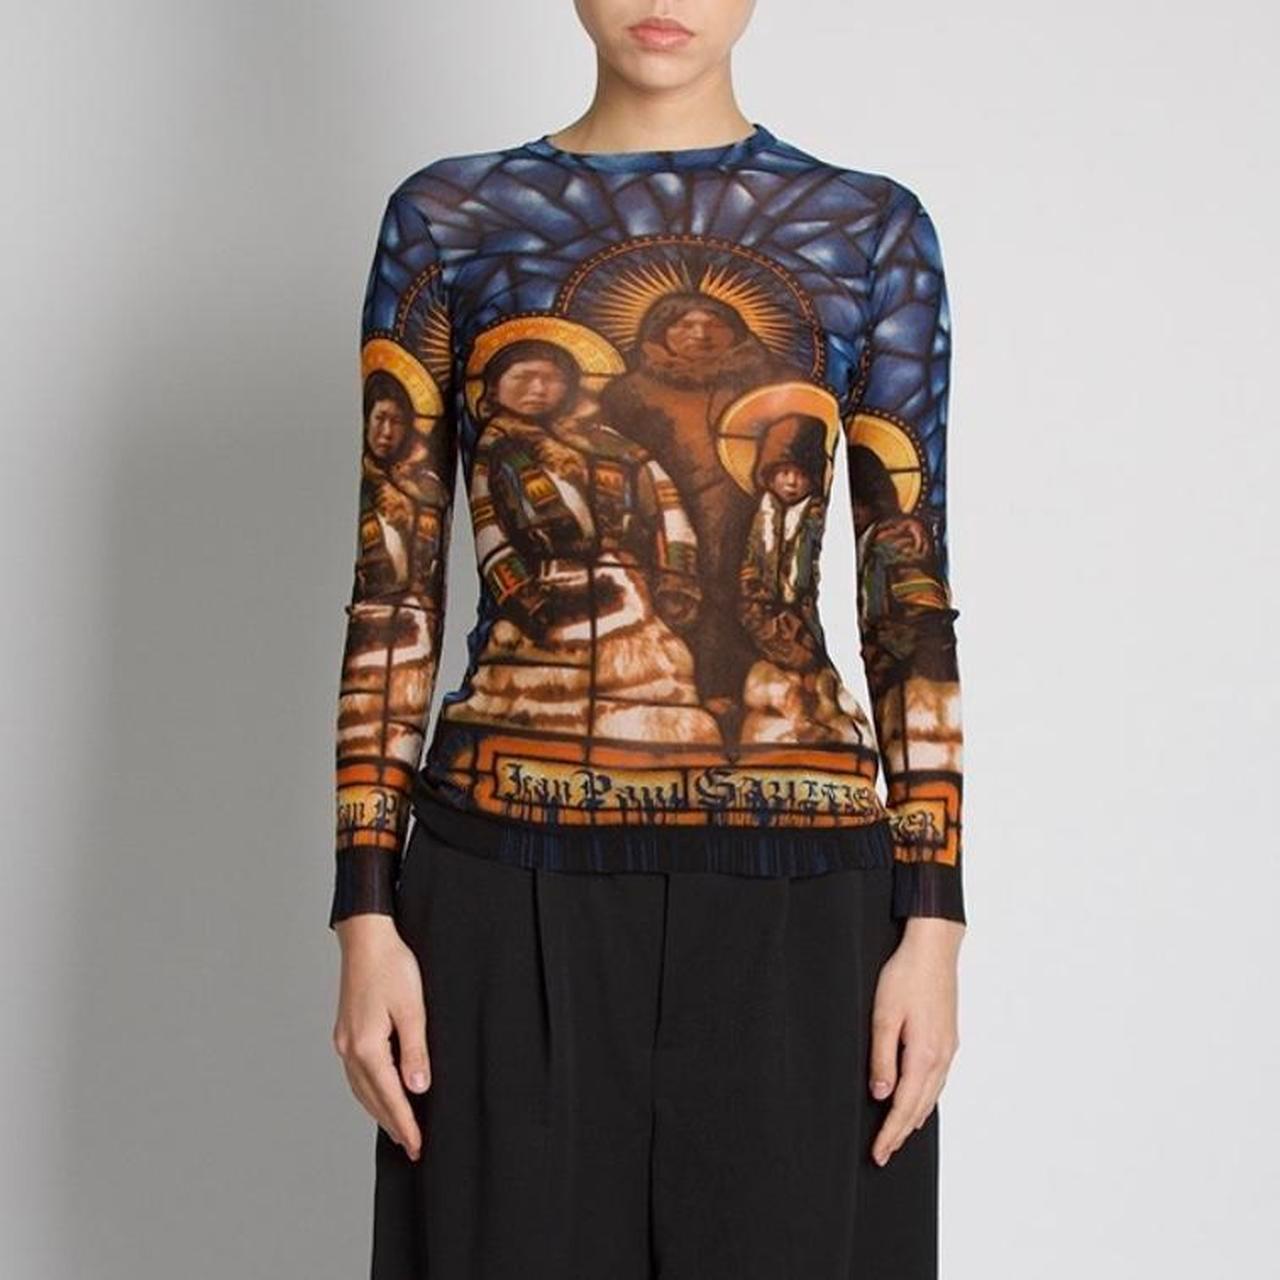 Jean Paul Gaultier Mesh Top

Stained Glass Saint Print


Long Sleeve

Iconic Print 

Lightweight Stretchy Silky Mesh Material 

100% Authentic

CONDITION: Good Condition, No Flaws.

SIZE: S 

The stretchy mesh material can be flexible in terms of